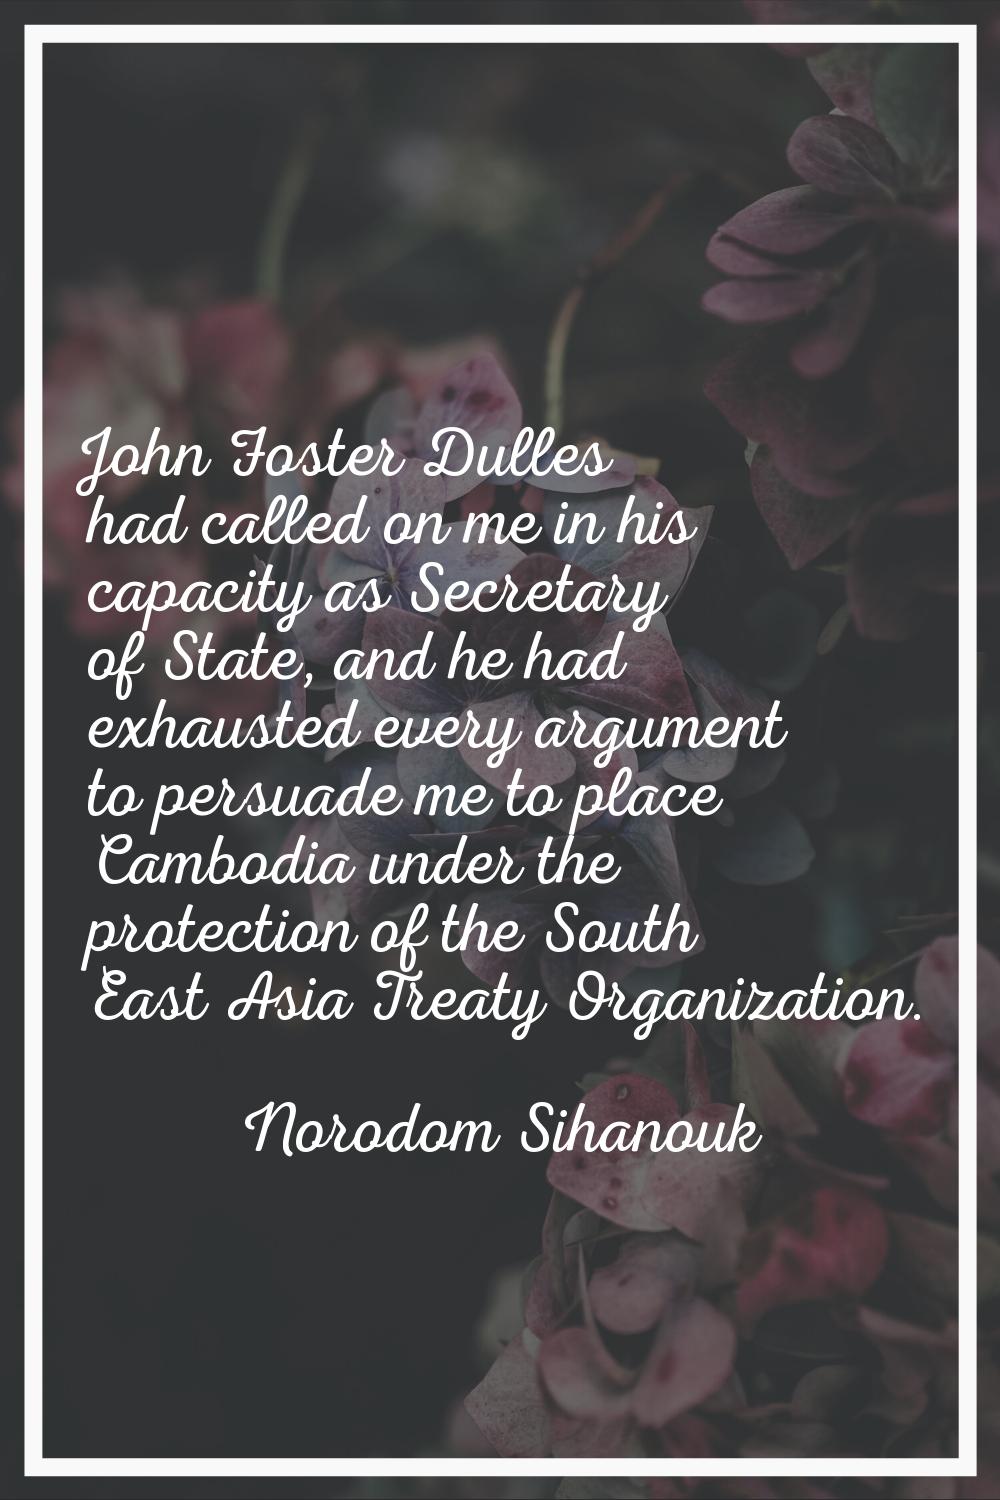 John Foster Dulles had called on me in his capacity as Secretary of State, and he had exhausted eve